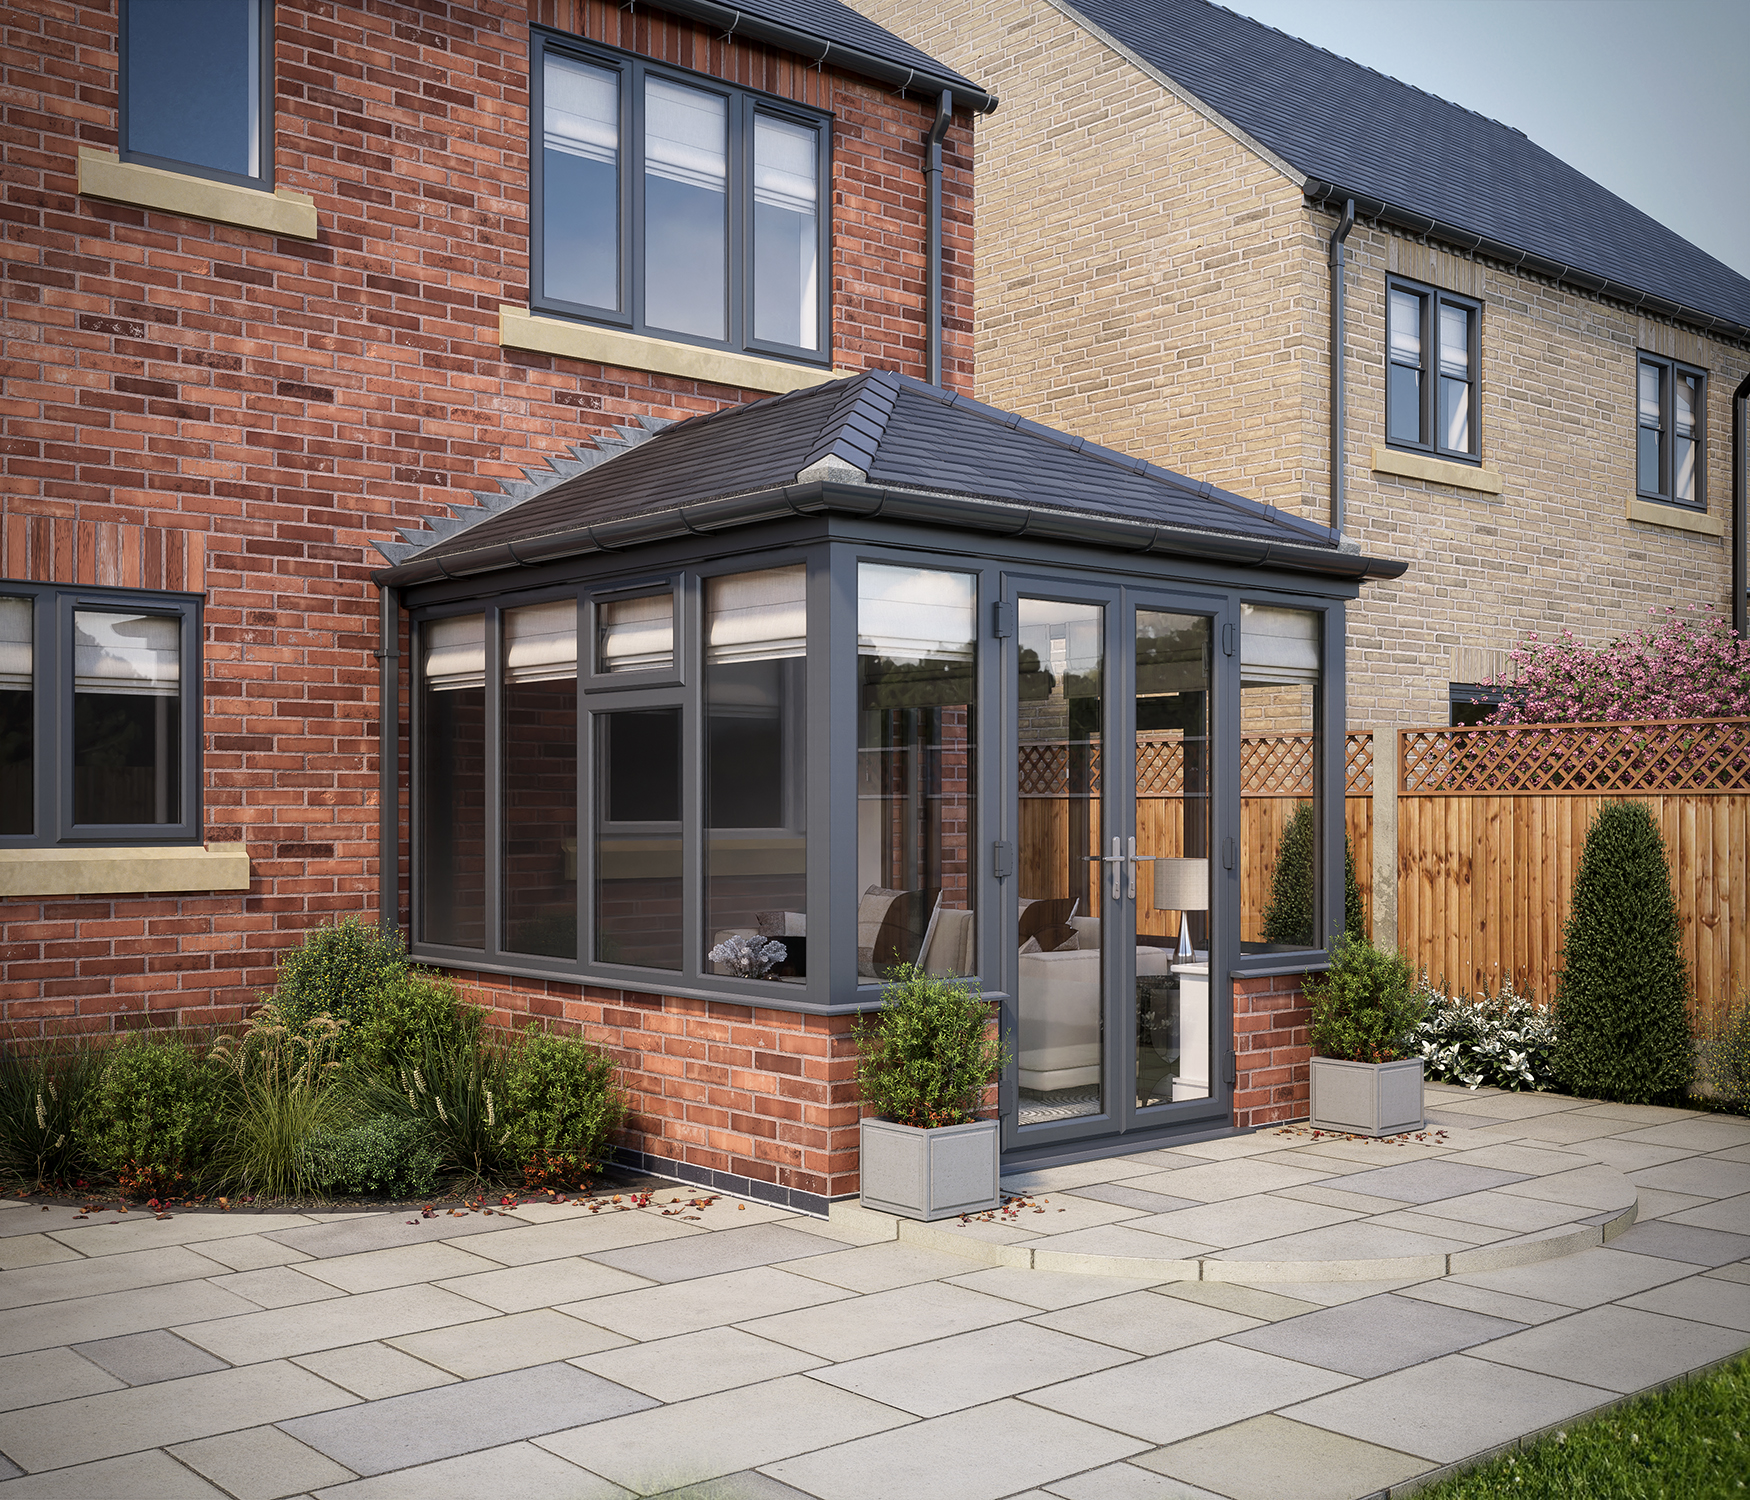 SOLid Roof Edwardian Conservatory Grey Frames Dwarf Wall with Titanium Grey Tiles - 13 x 13ft